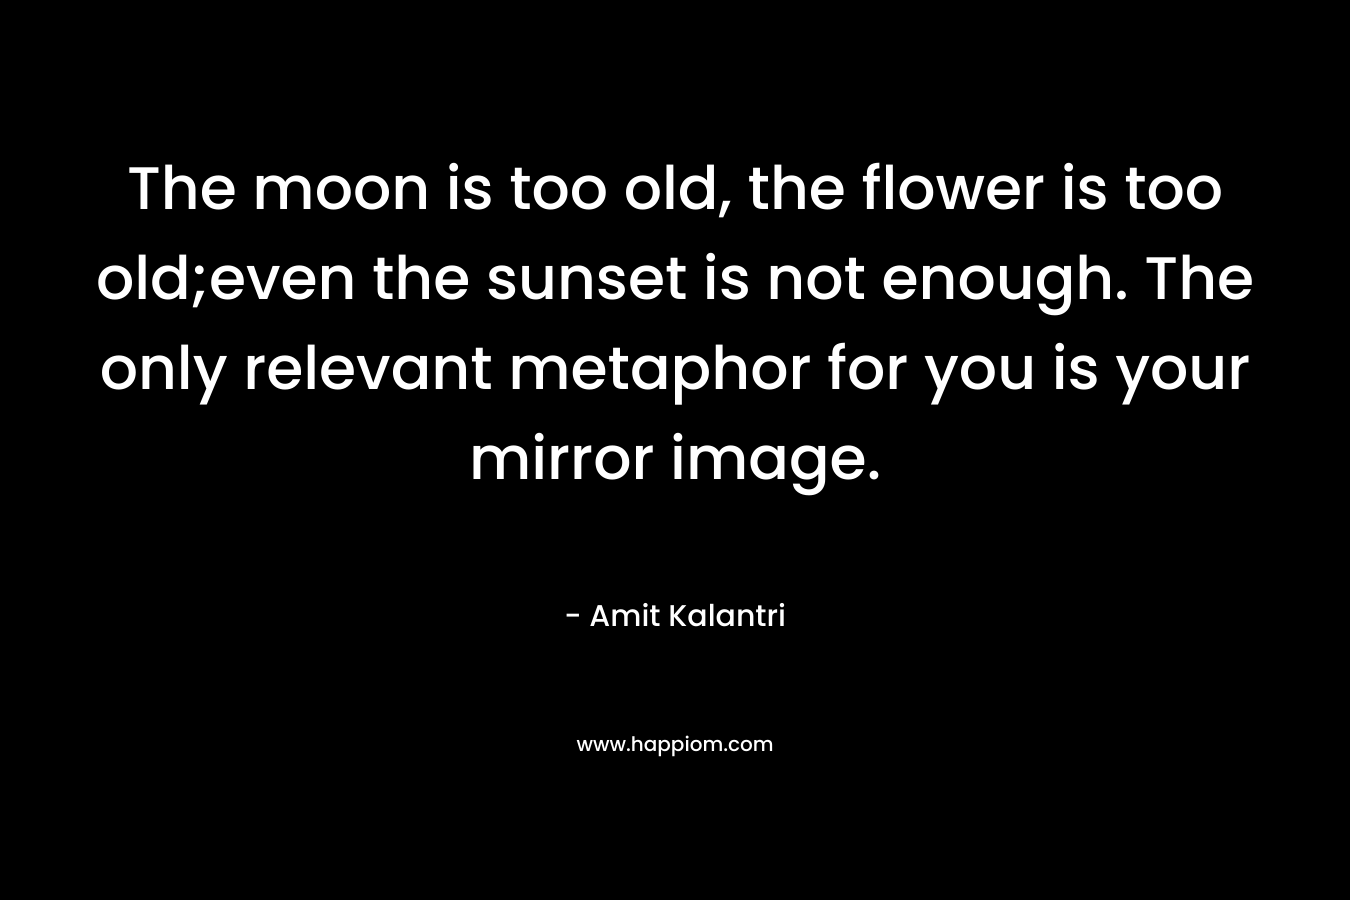 The moon is too old, the flower is too old;even the sunset is not enough. The only relevant metaphor for you is your mirror image. – Amit Kalantri